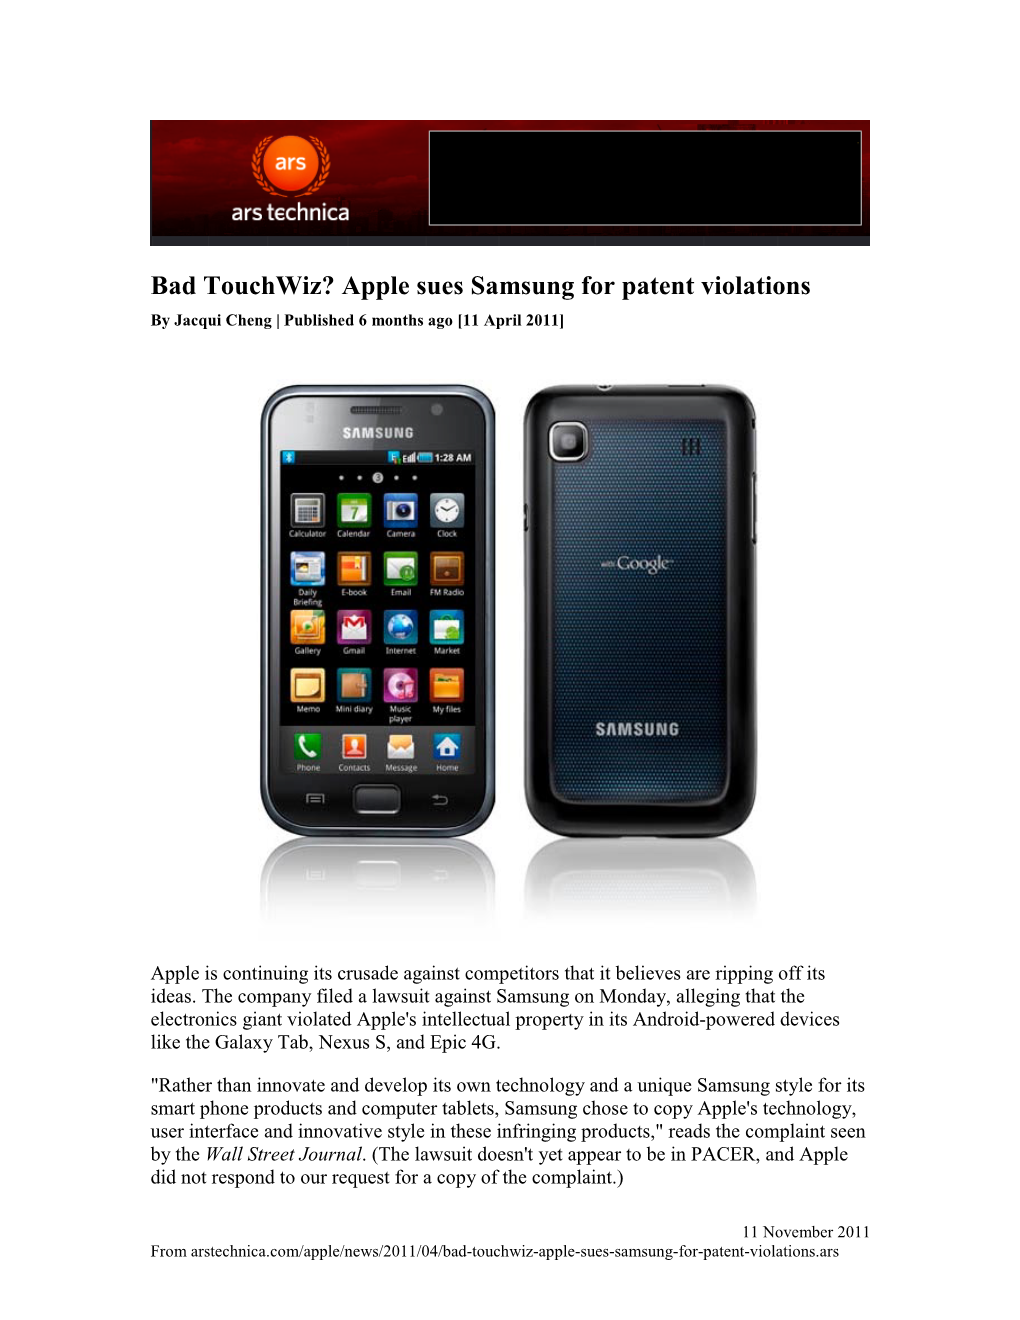 Bad Touchwiz? Apple Sues Samsung for Patent Violations by Jacqui Cheng | Published 6 Months Ago [11 April 2011]